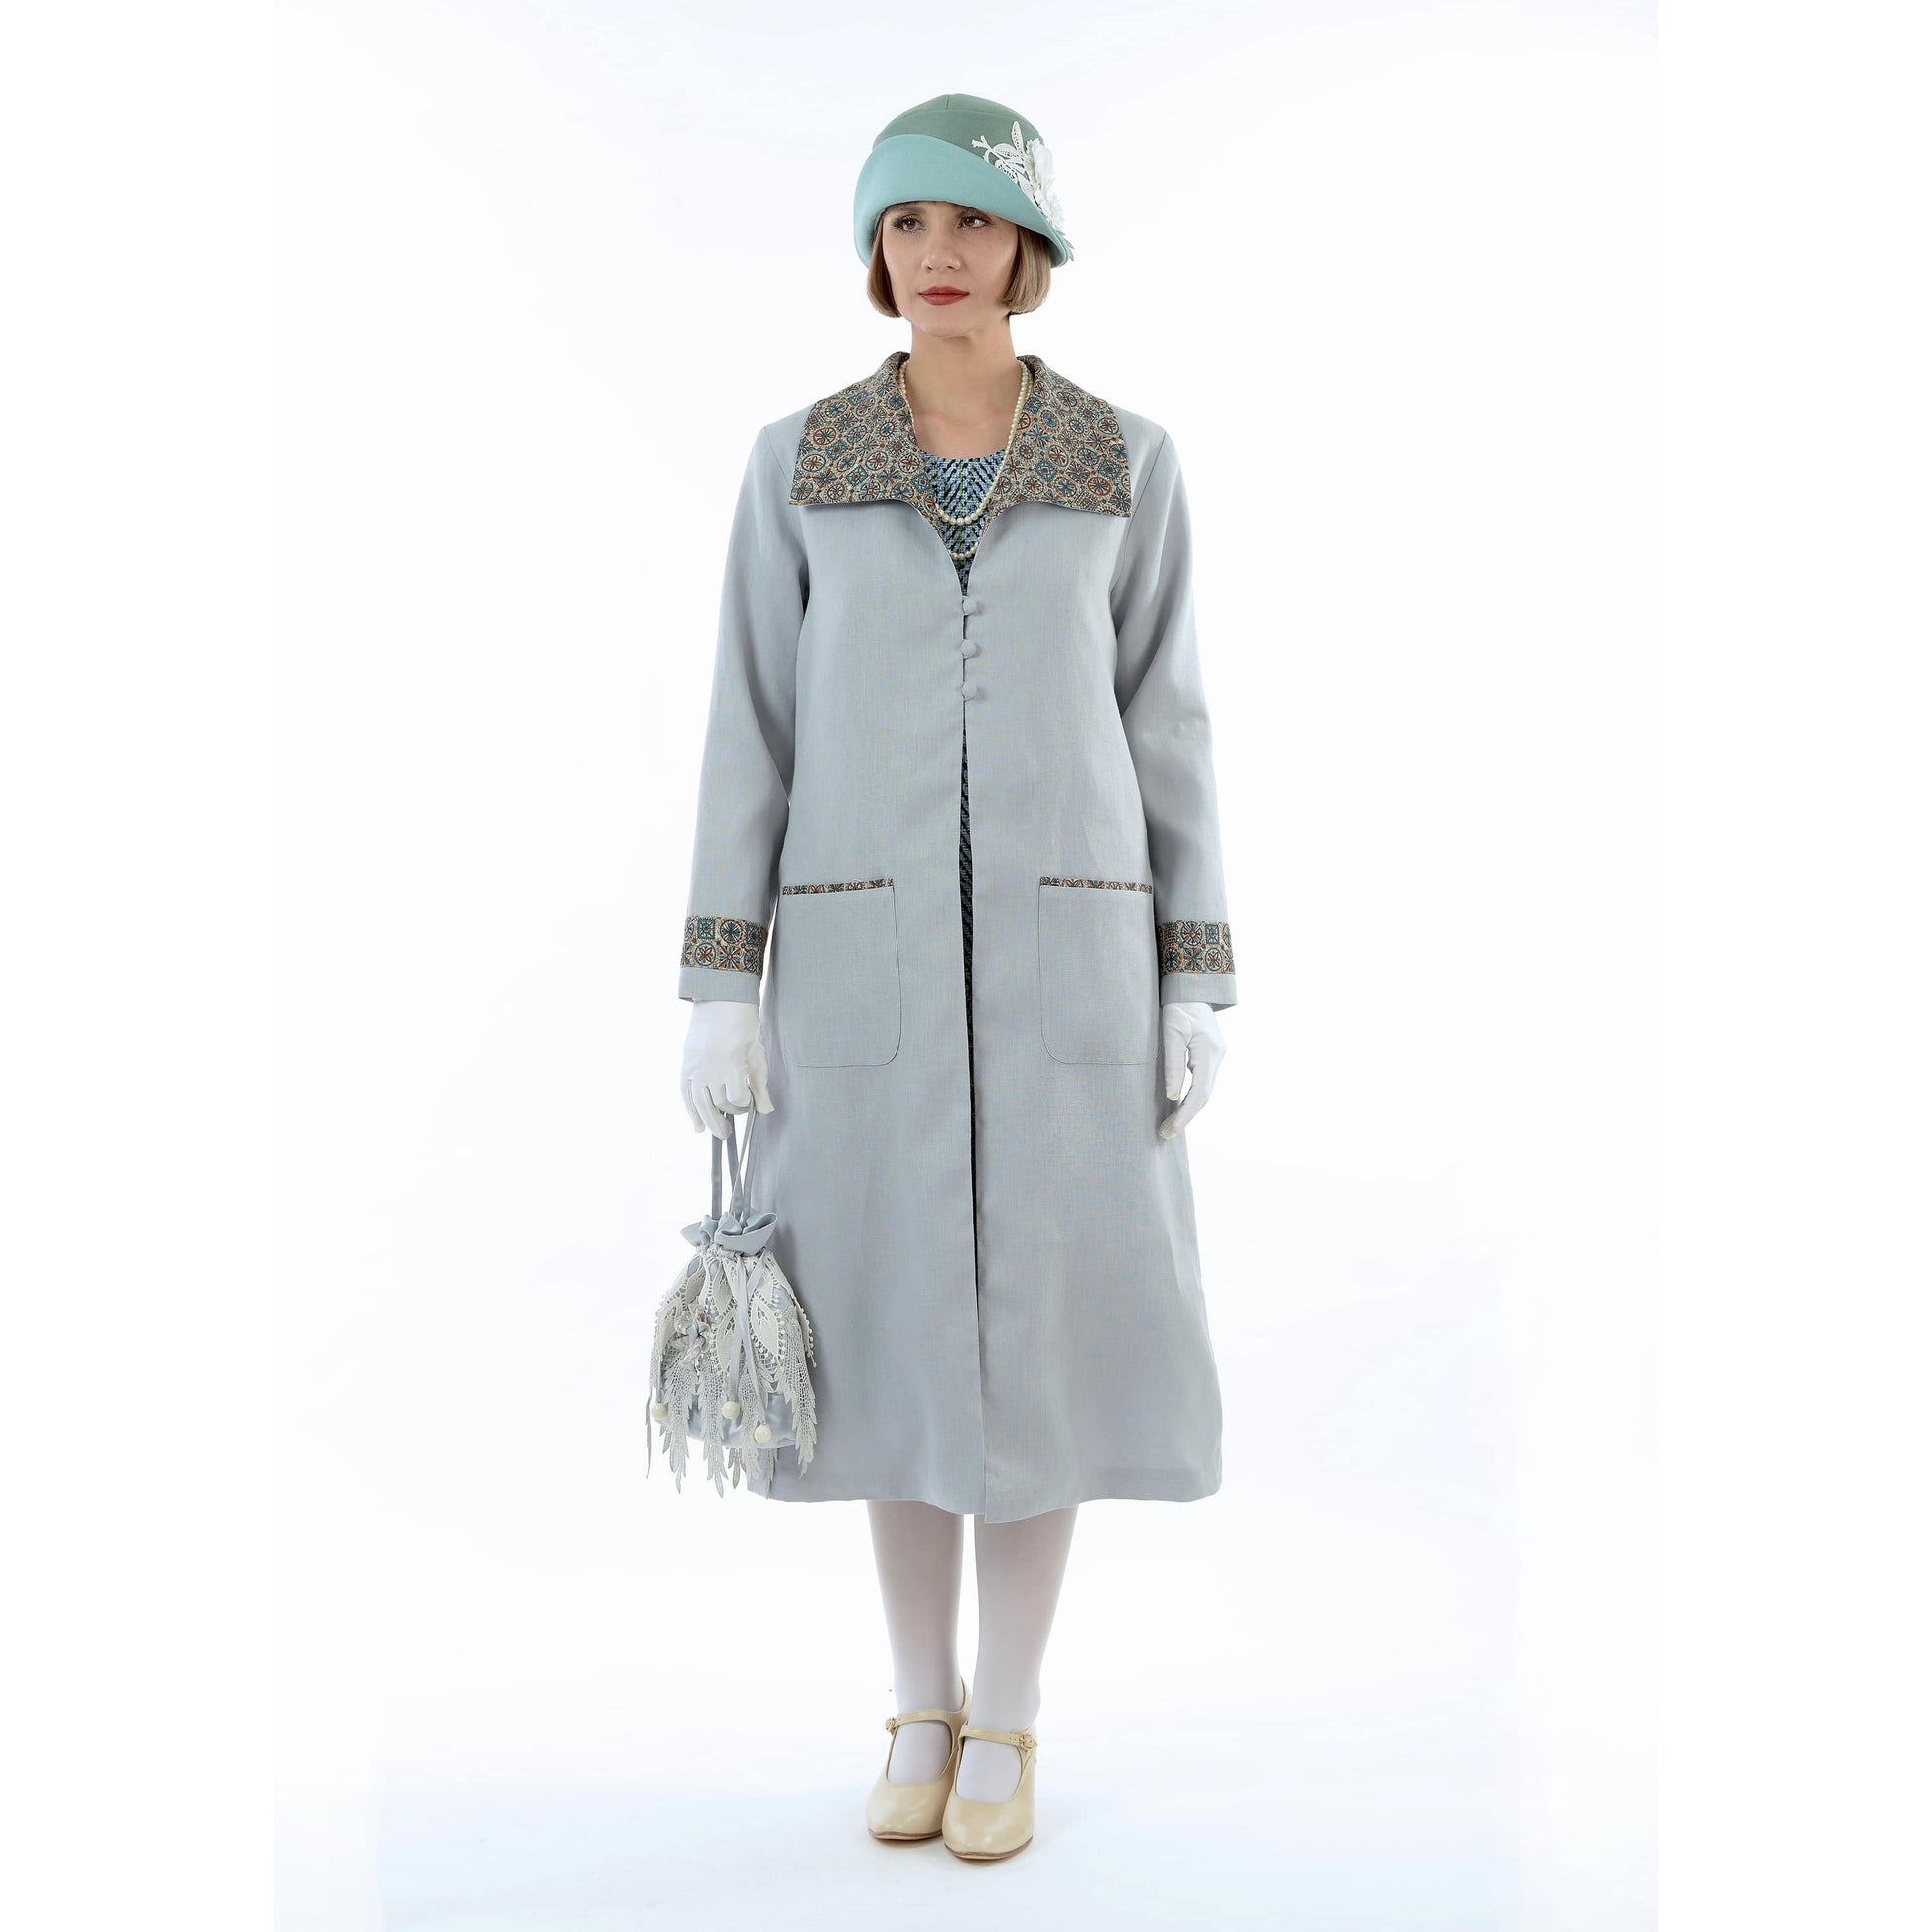 Linen 1920s coat in light grey with wing collar. This 20s daywear can be worn as a summer Gatsby jacket or a flapper summer overcoat.